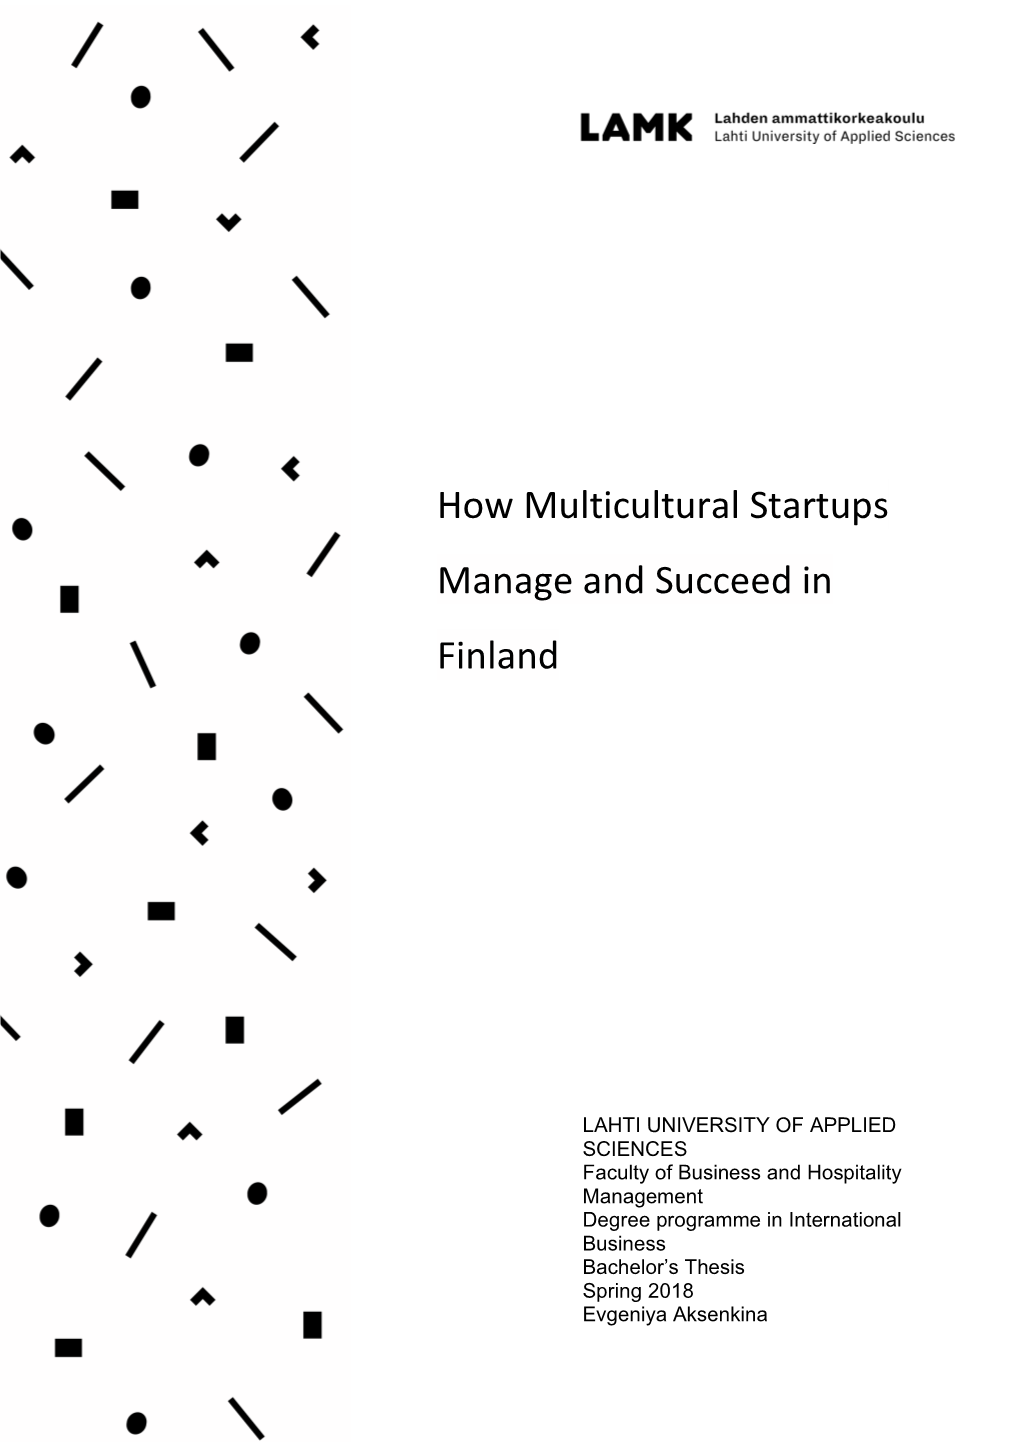 How Multicultural Startups Manage and Succeed in Finland